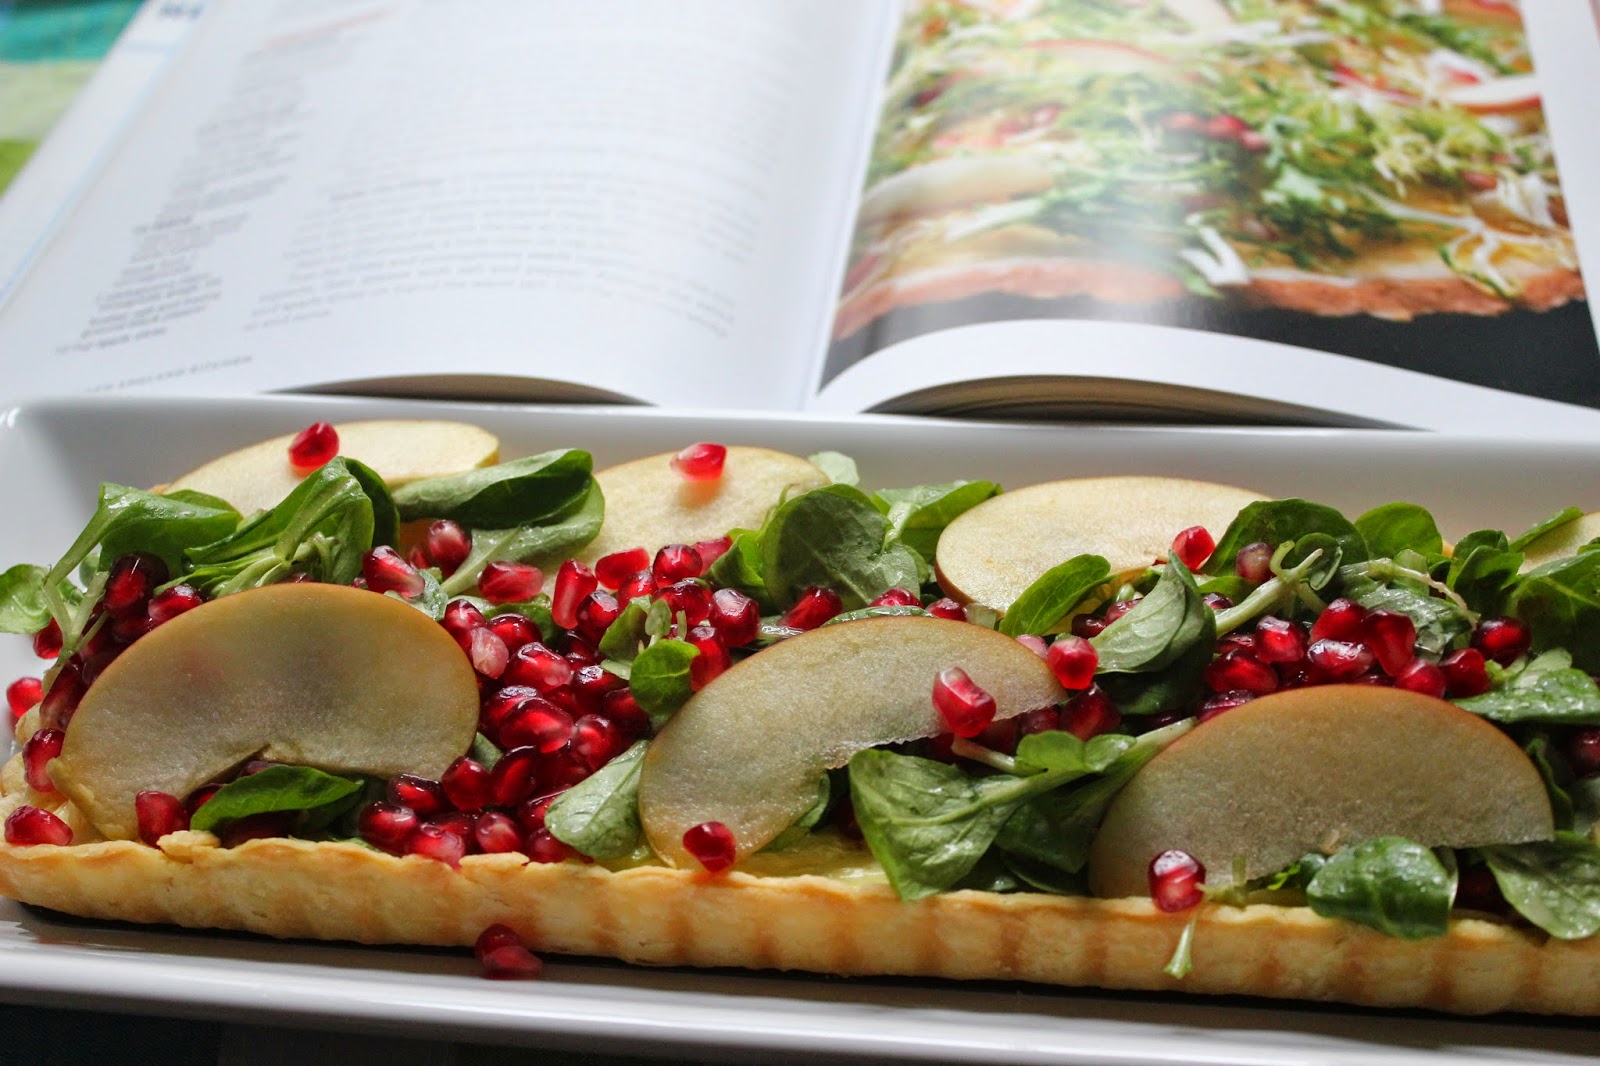 Goat Cheese Tart With Pomegranate And Mâche